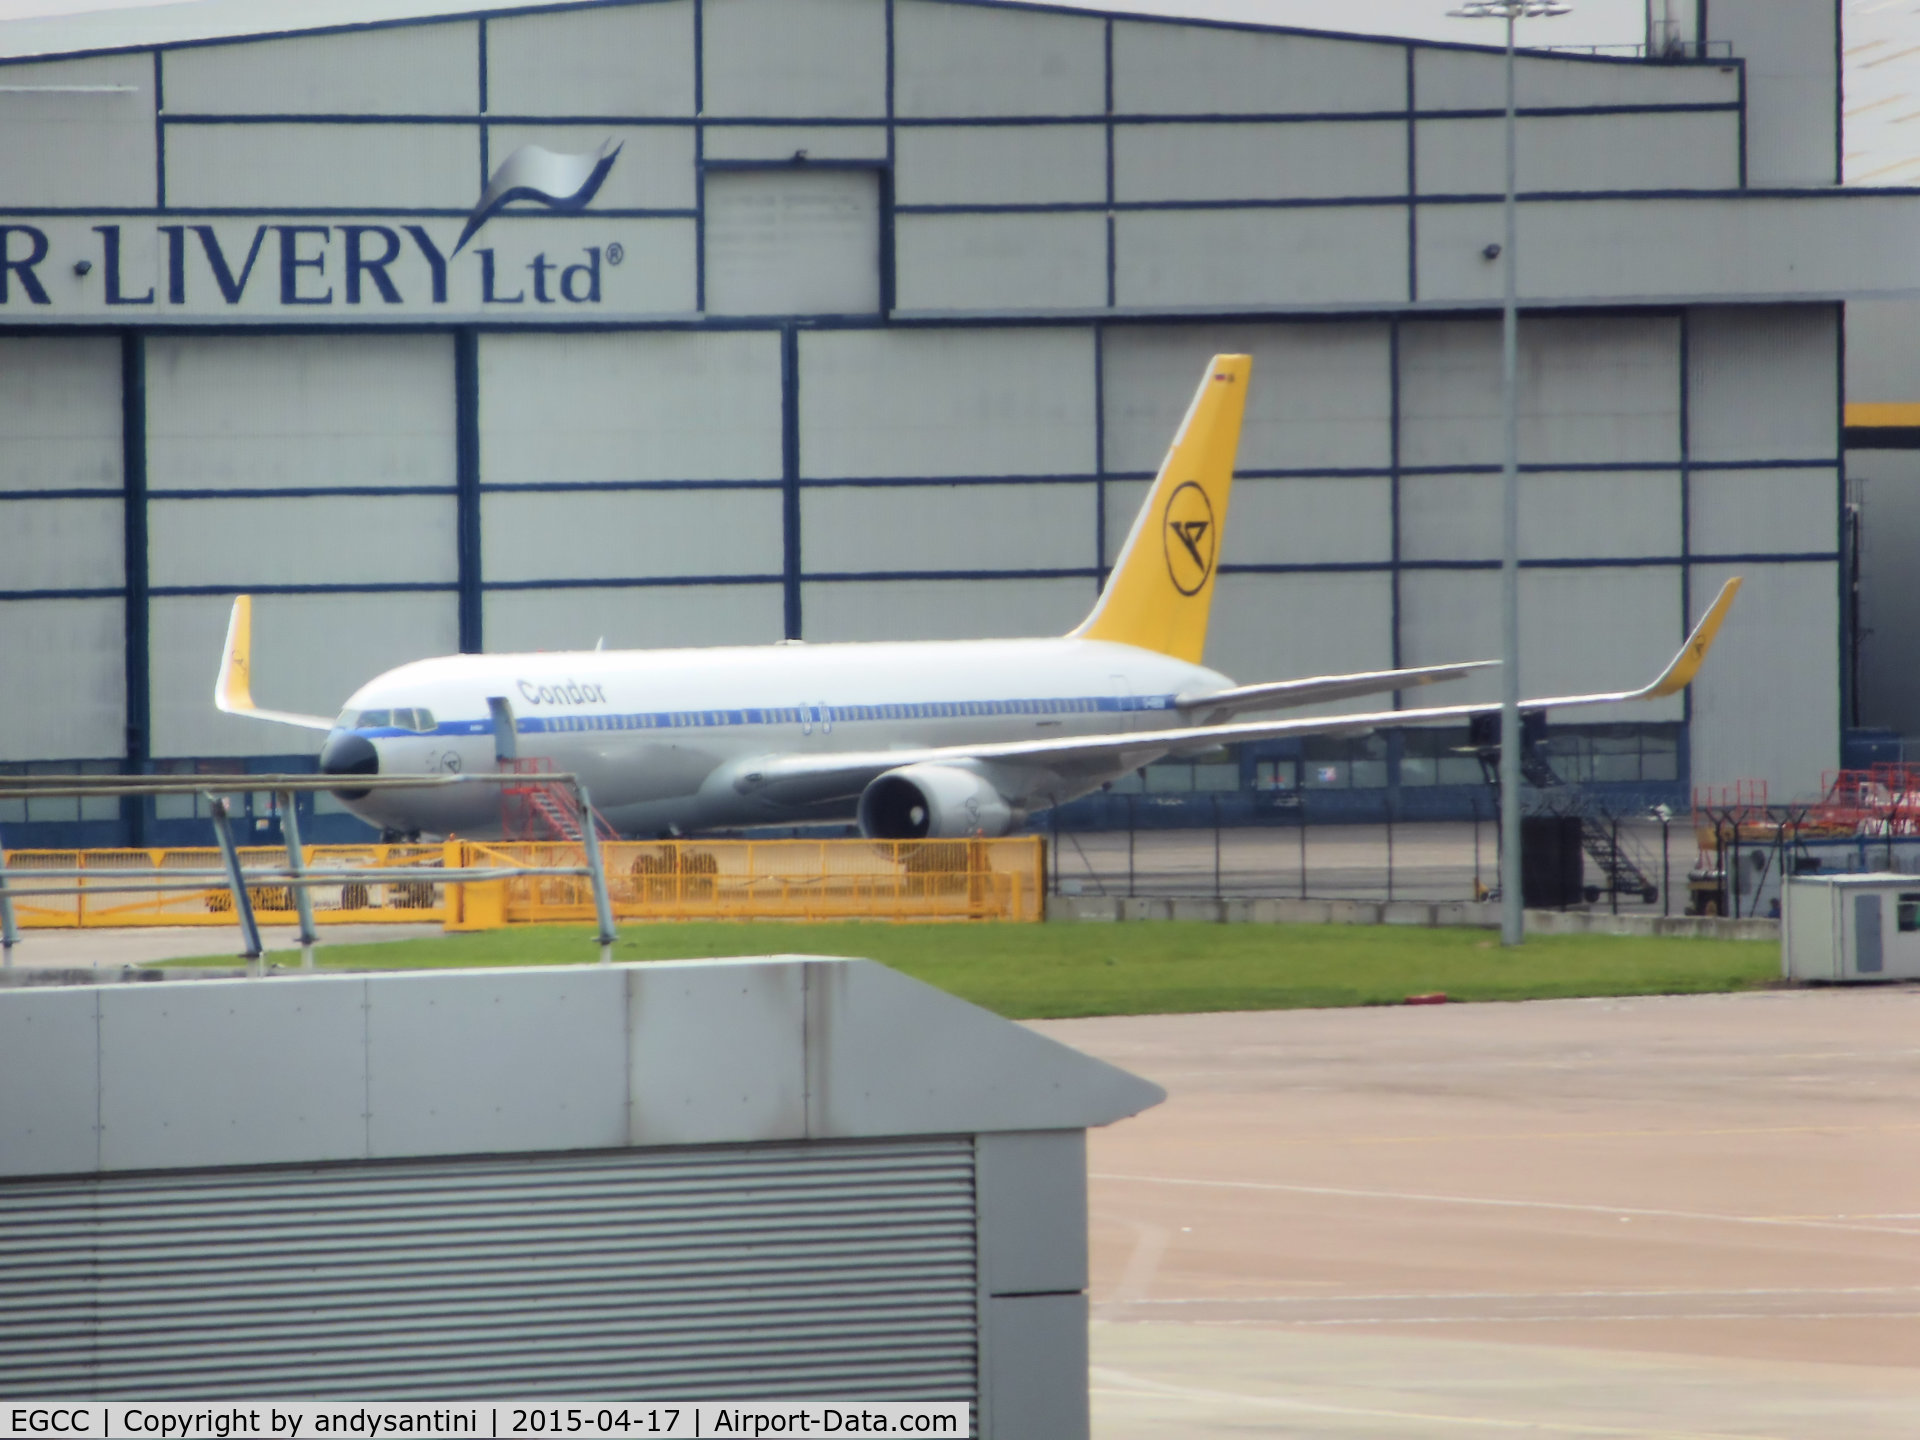 Manchester Airport, Manchester, England United Kingdom (EGCC) - CFG B767 outside the air livery hanger 